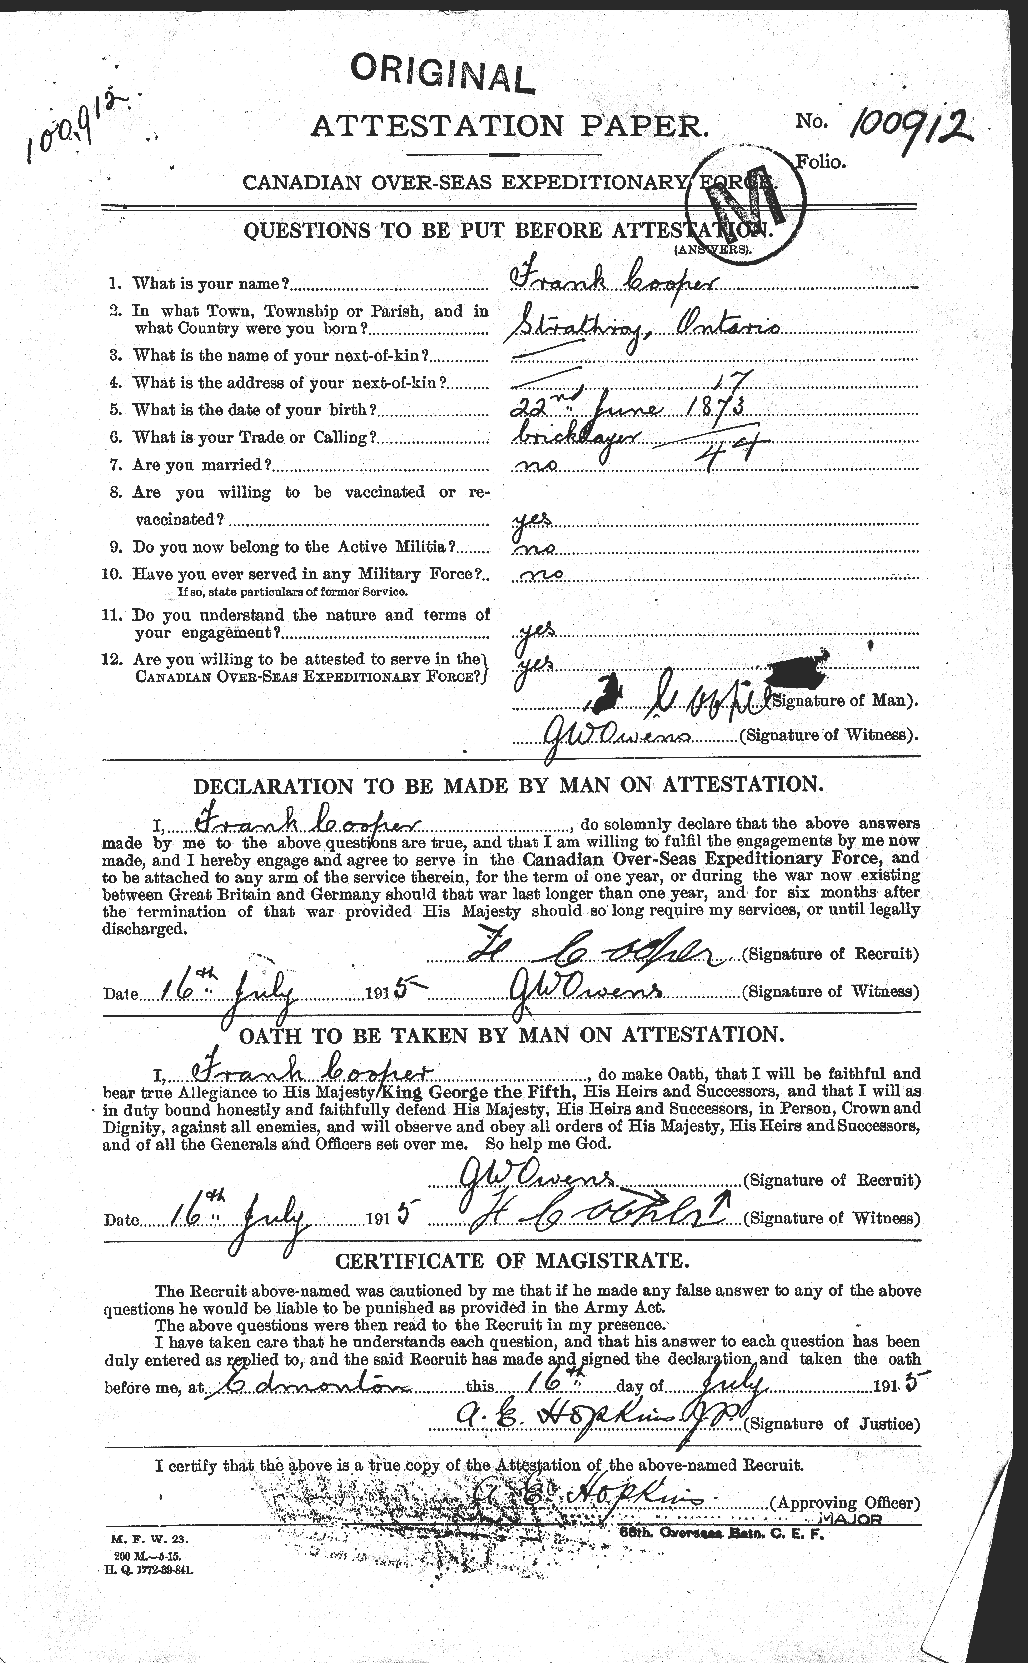 Personnel Records of the First World War - CEF 058233a